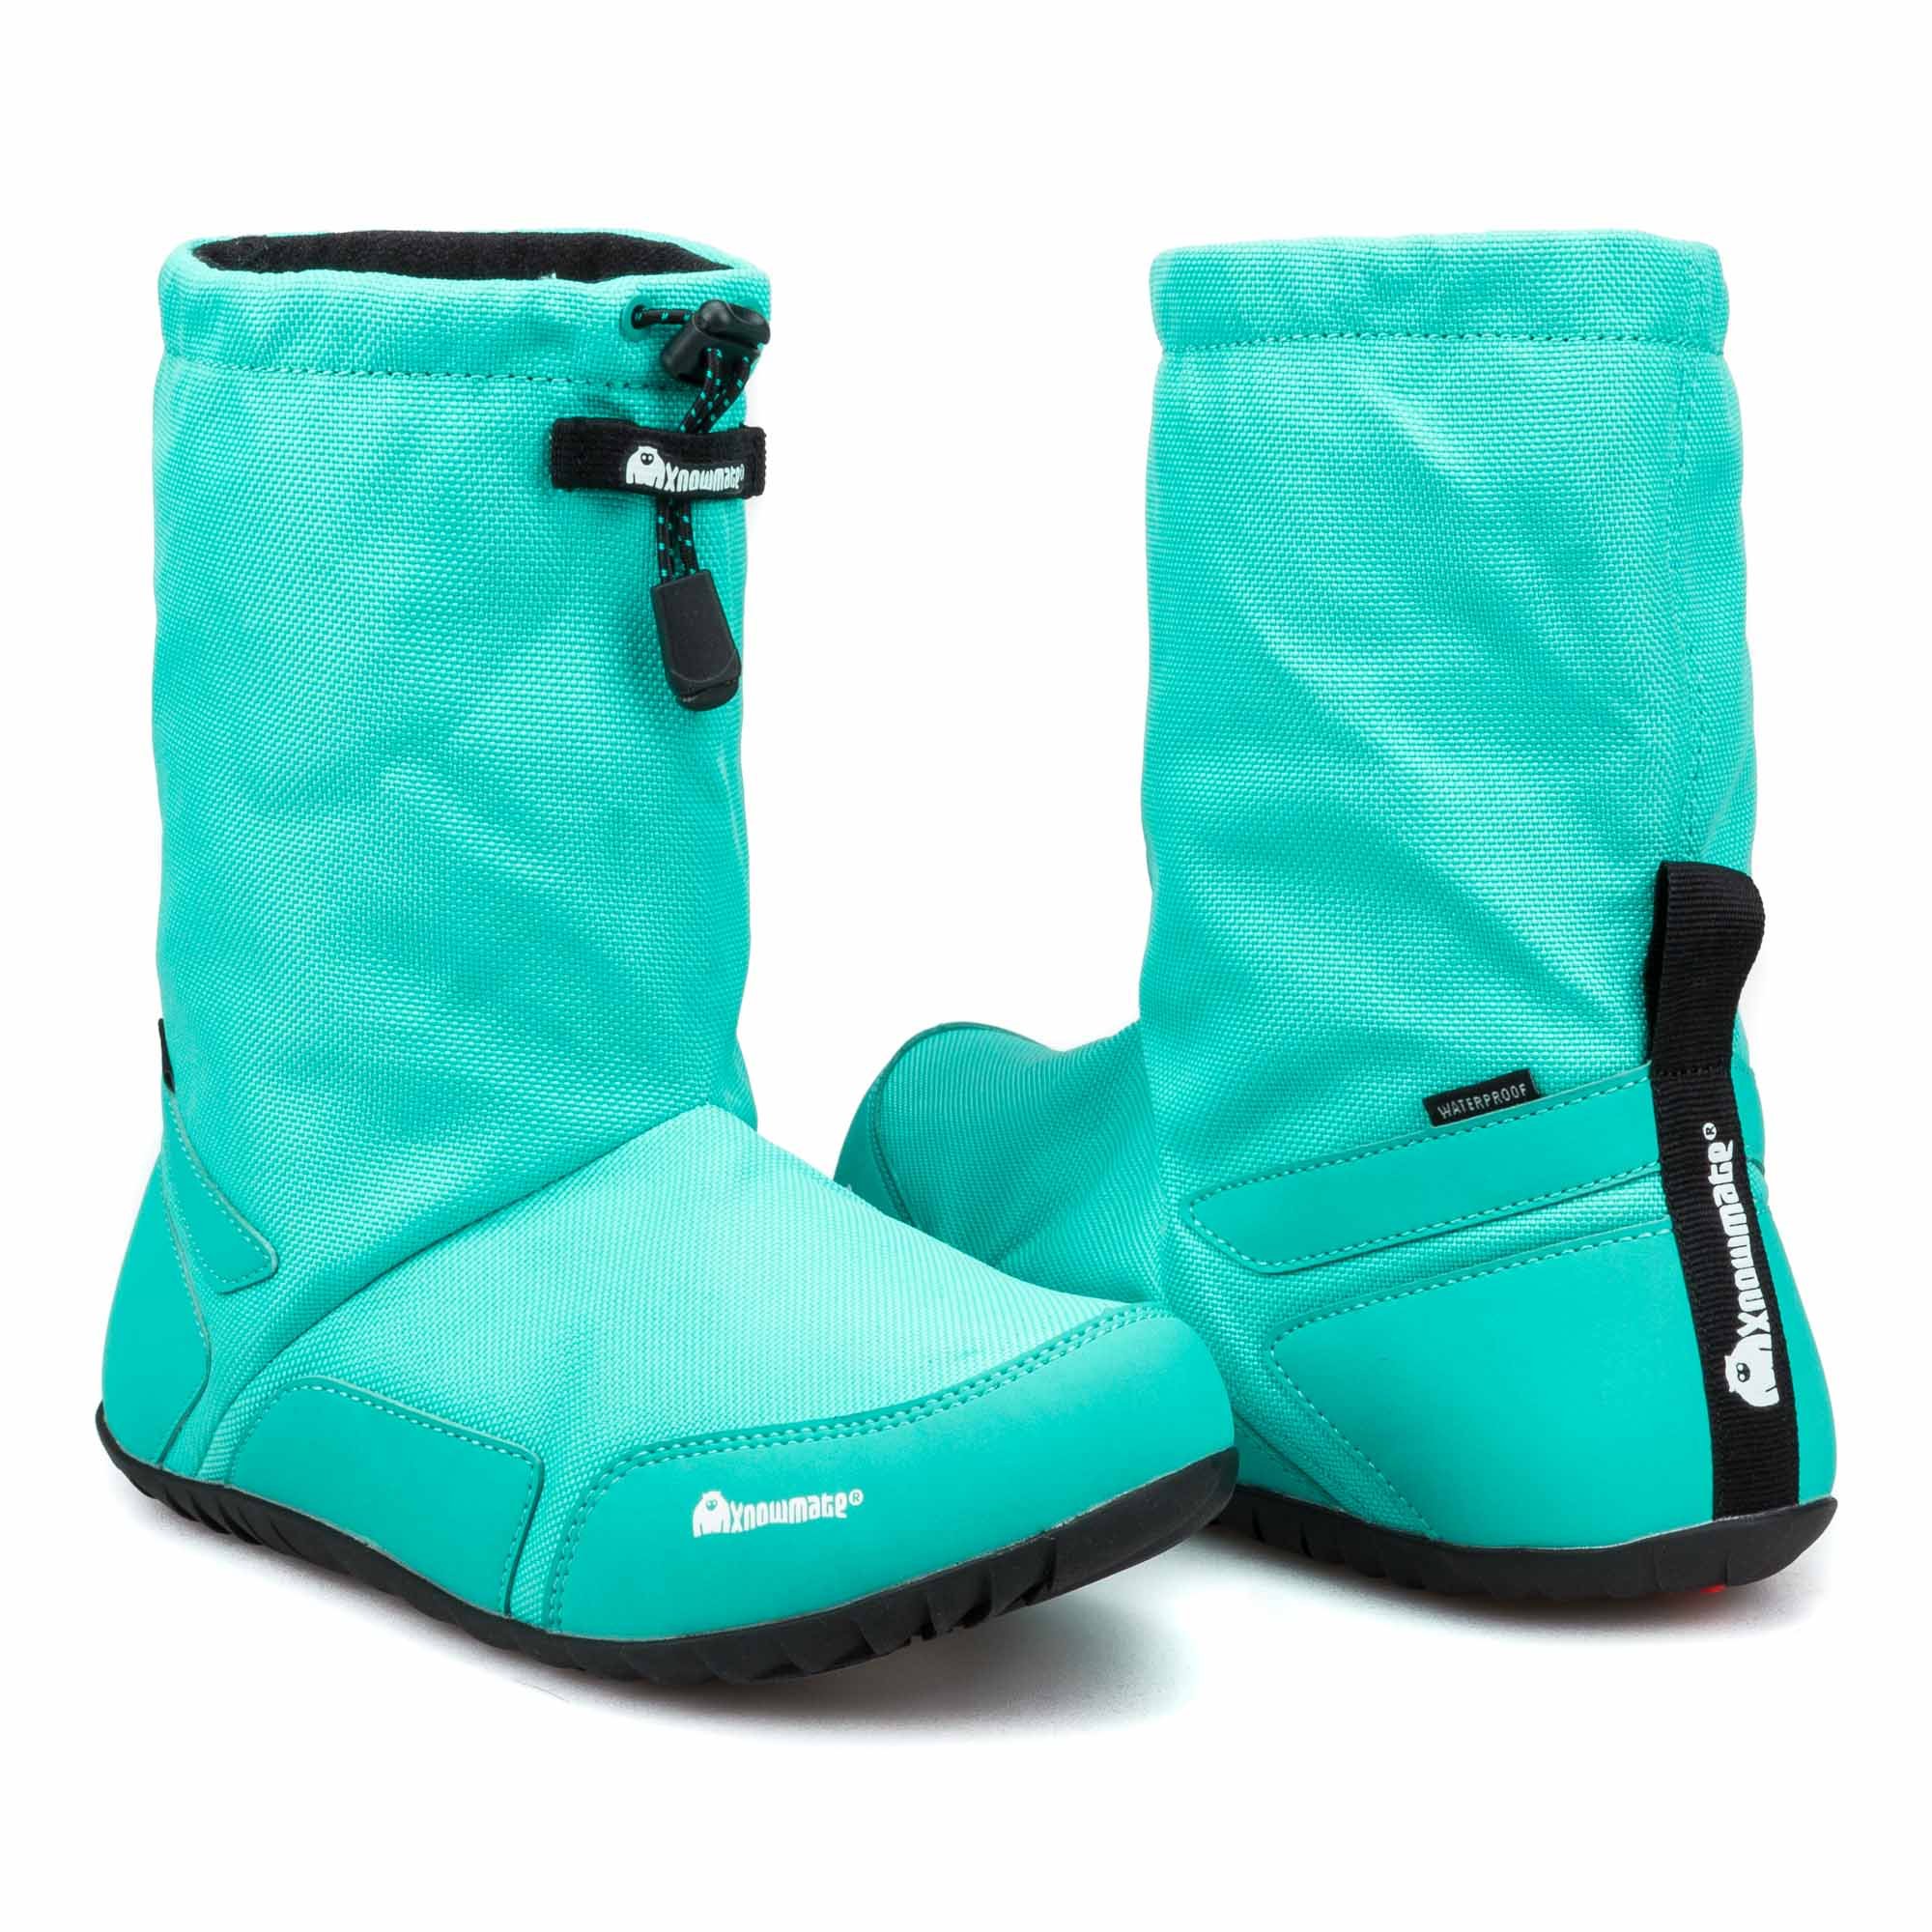 Xnowmate Boots Ceramic Teal